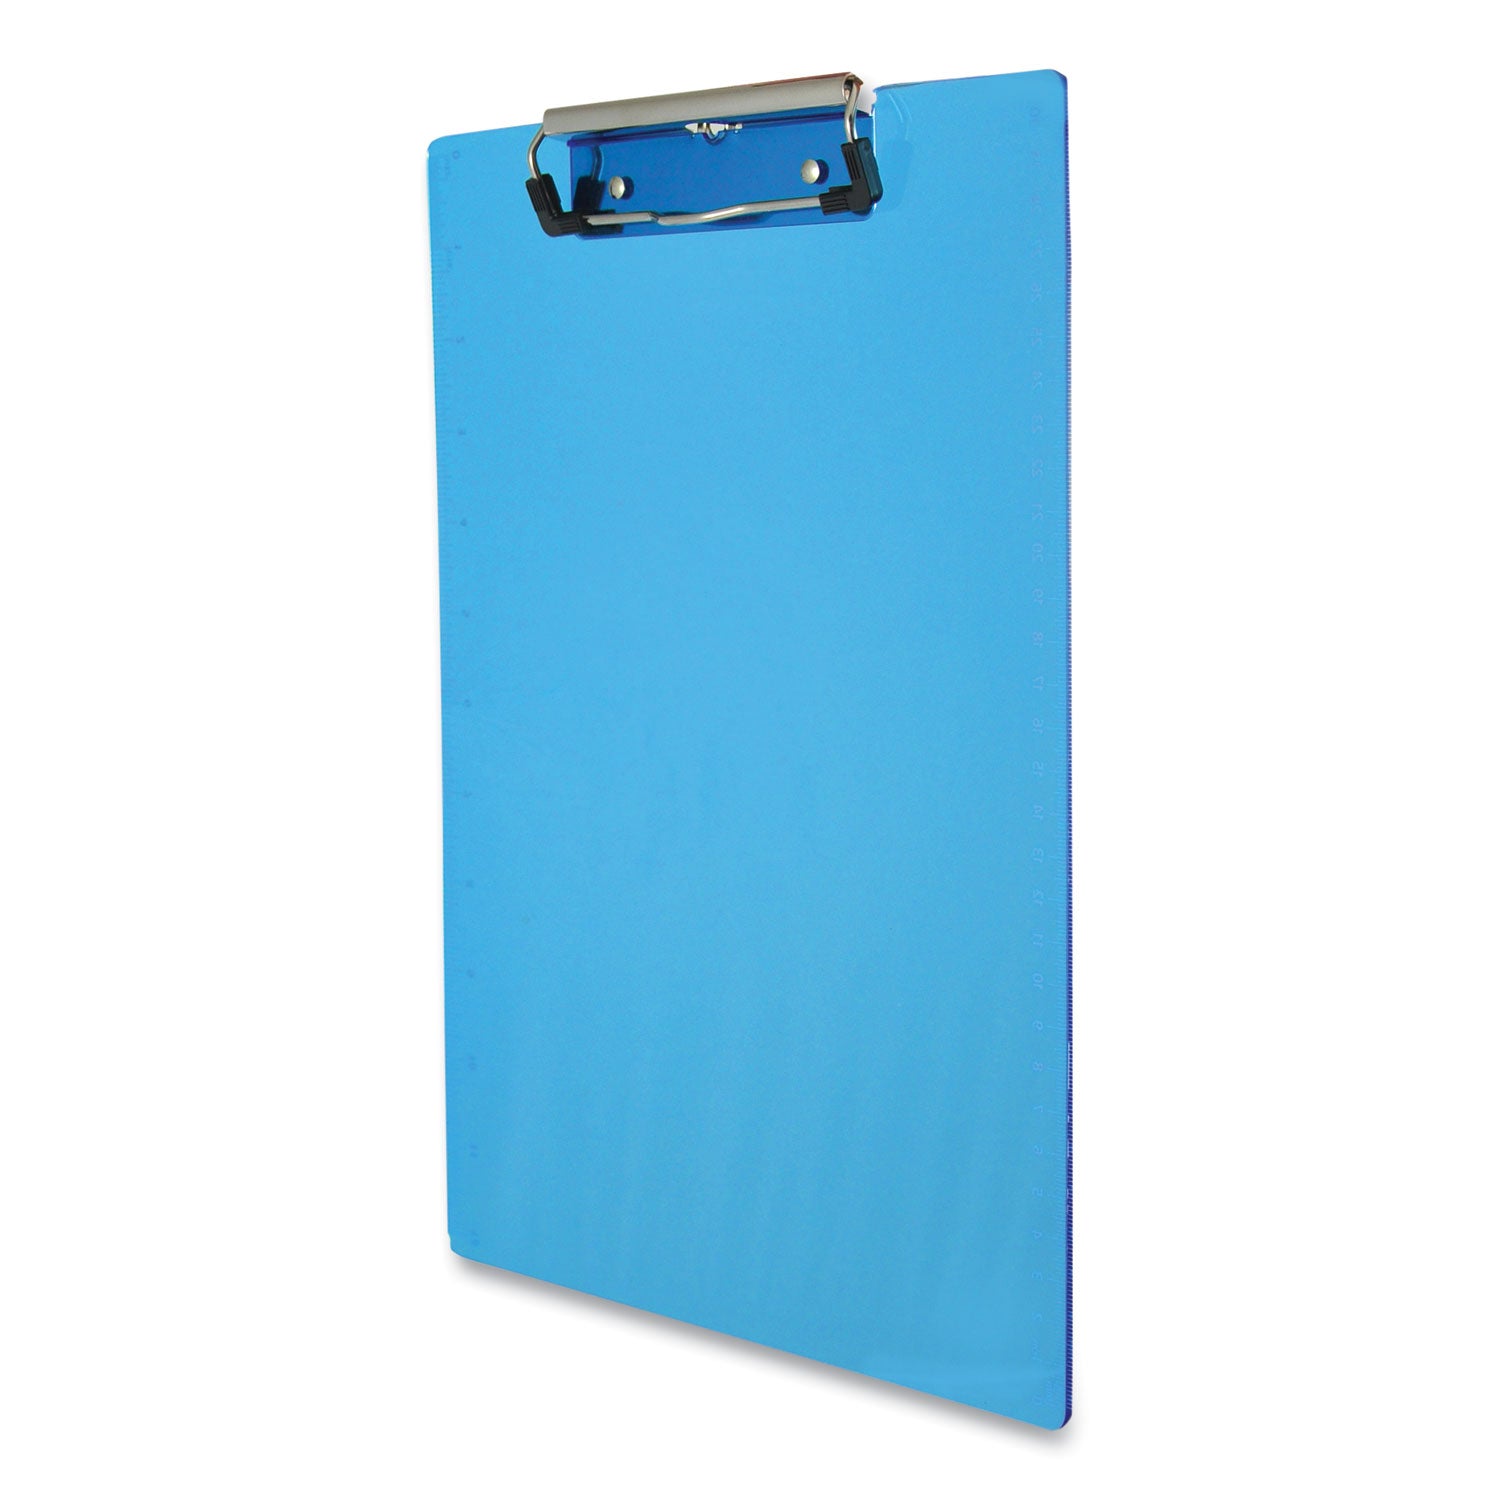 Acrylic Clipboard, 0.5" Clip Capacity, Holds 8.5 x 11 Sheets, Transparent Blue - 